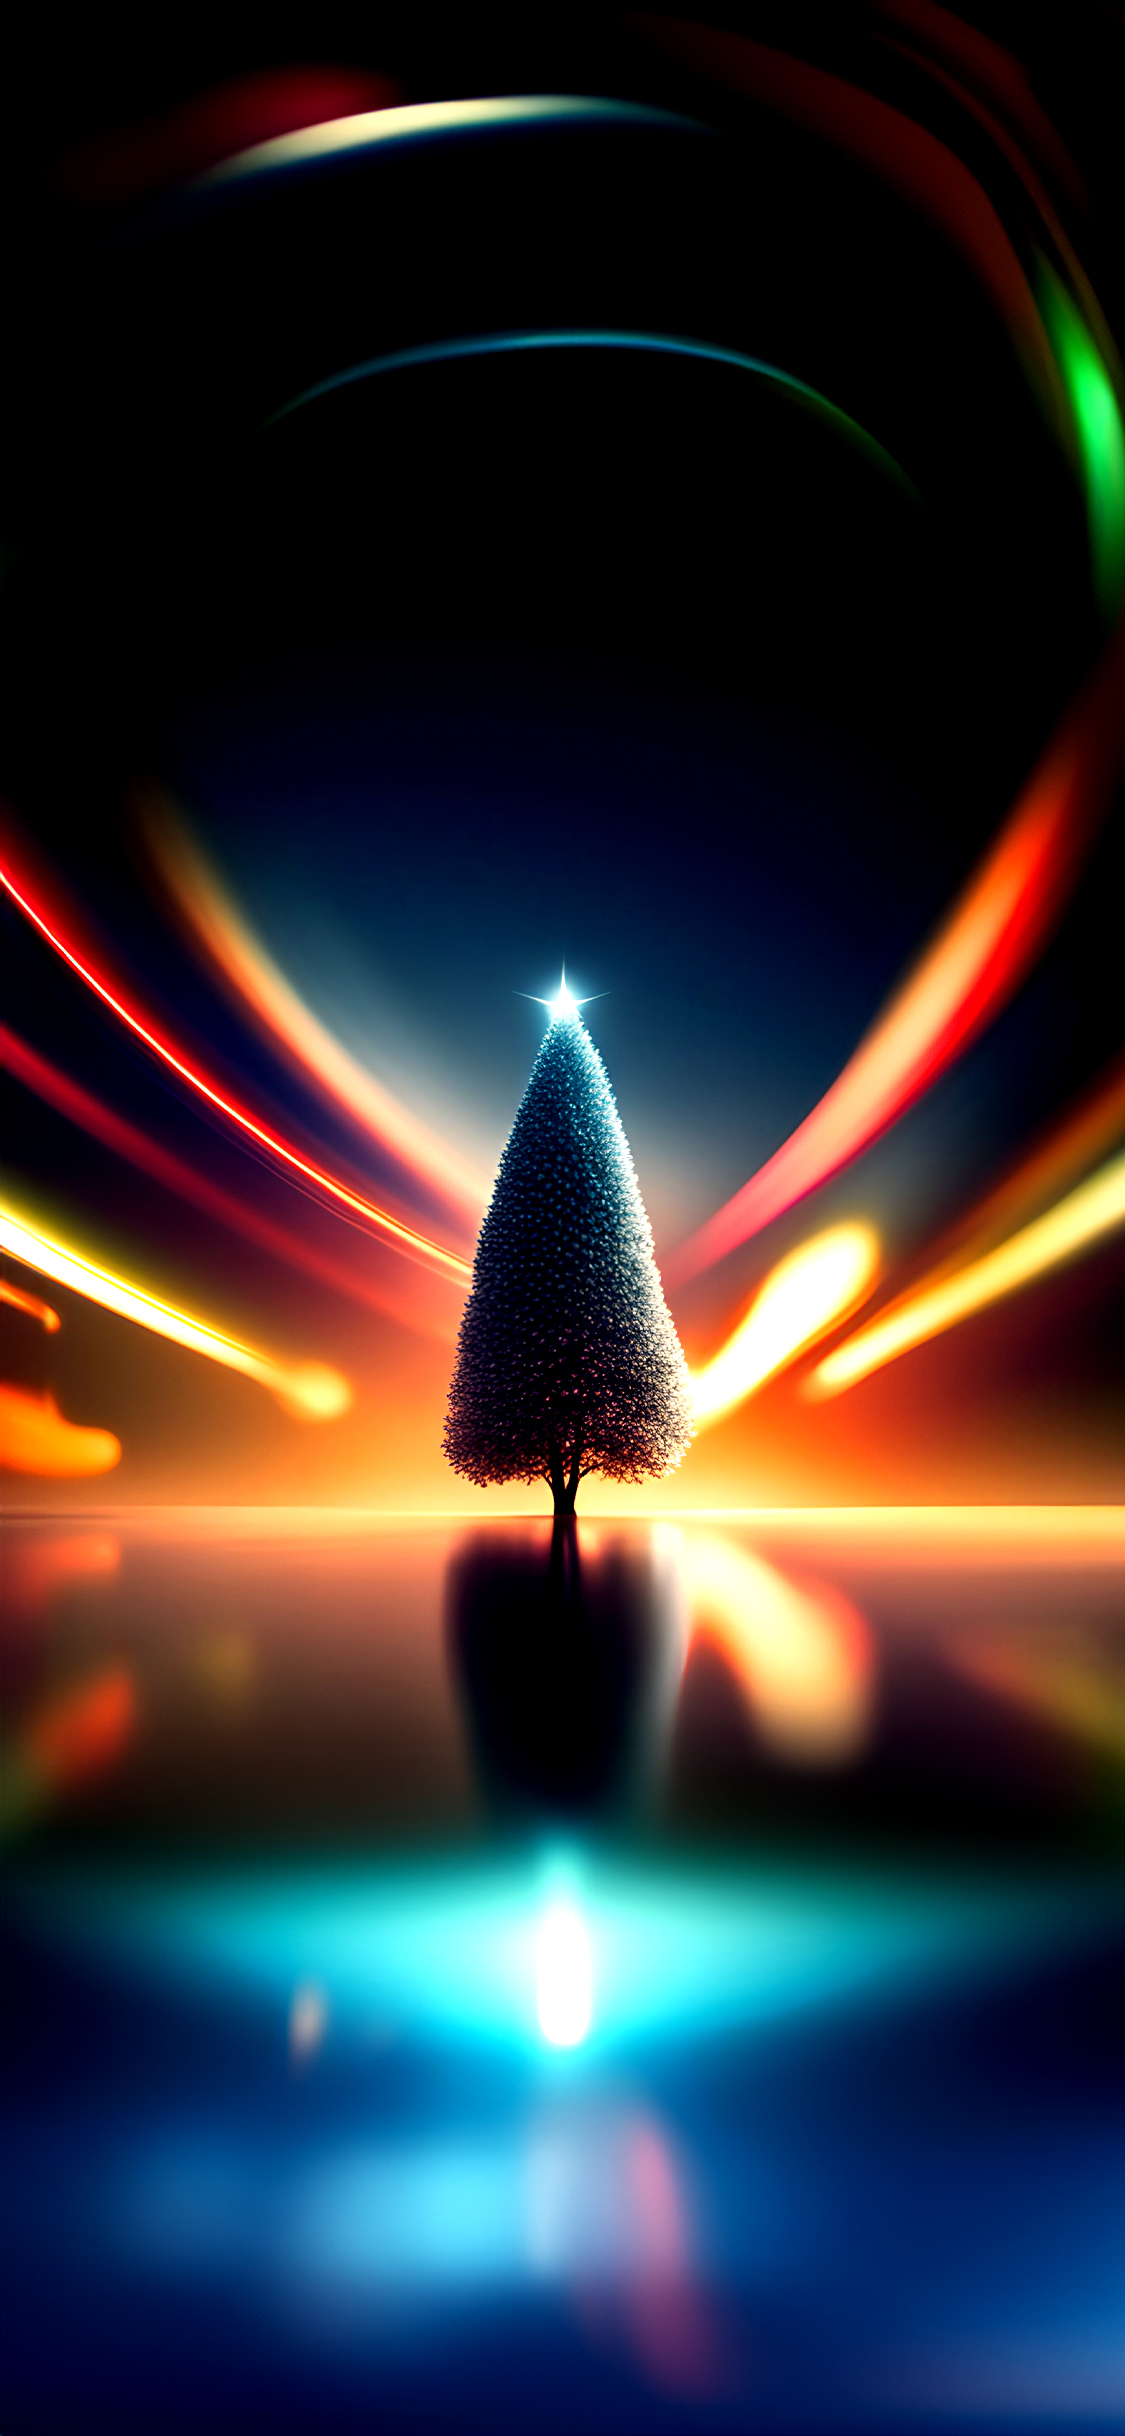 abstract christmas iphone wallpaper